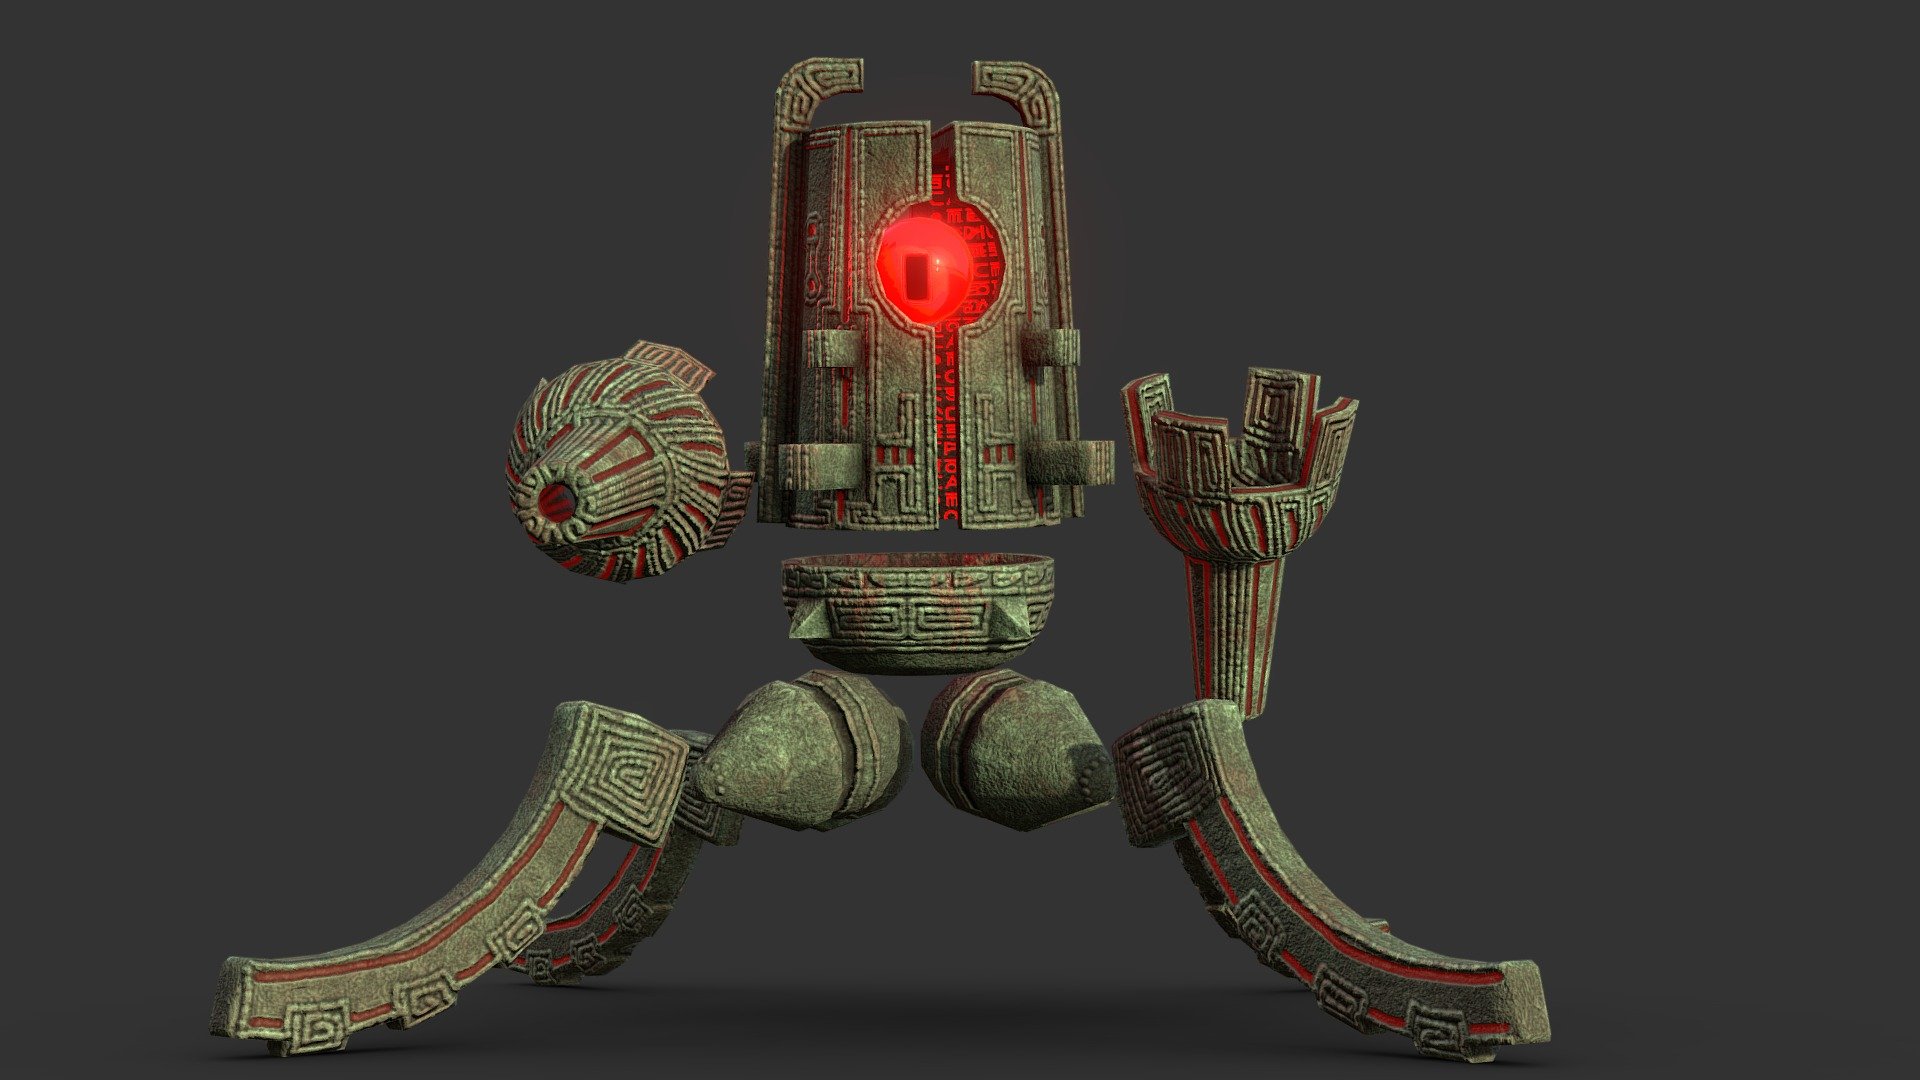 Sometimes I design creatures/monsters, and sometimes, I like the designs enough to model them. So I modeled this massive bronze turret-like construct that originated in one of my sketchbook

Made in 3DSMax and Substance Painter 3d model